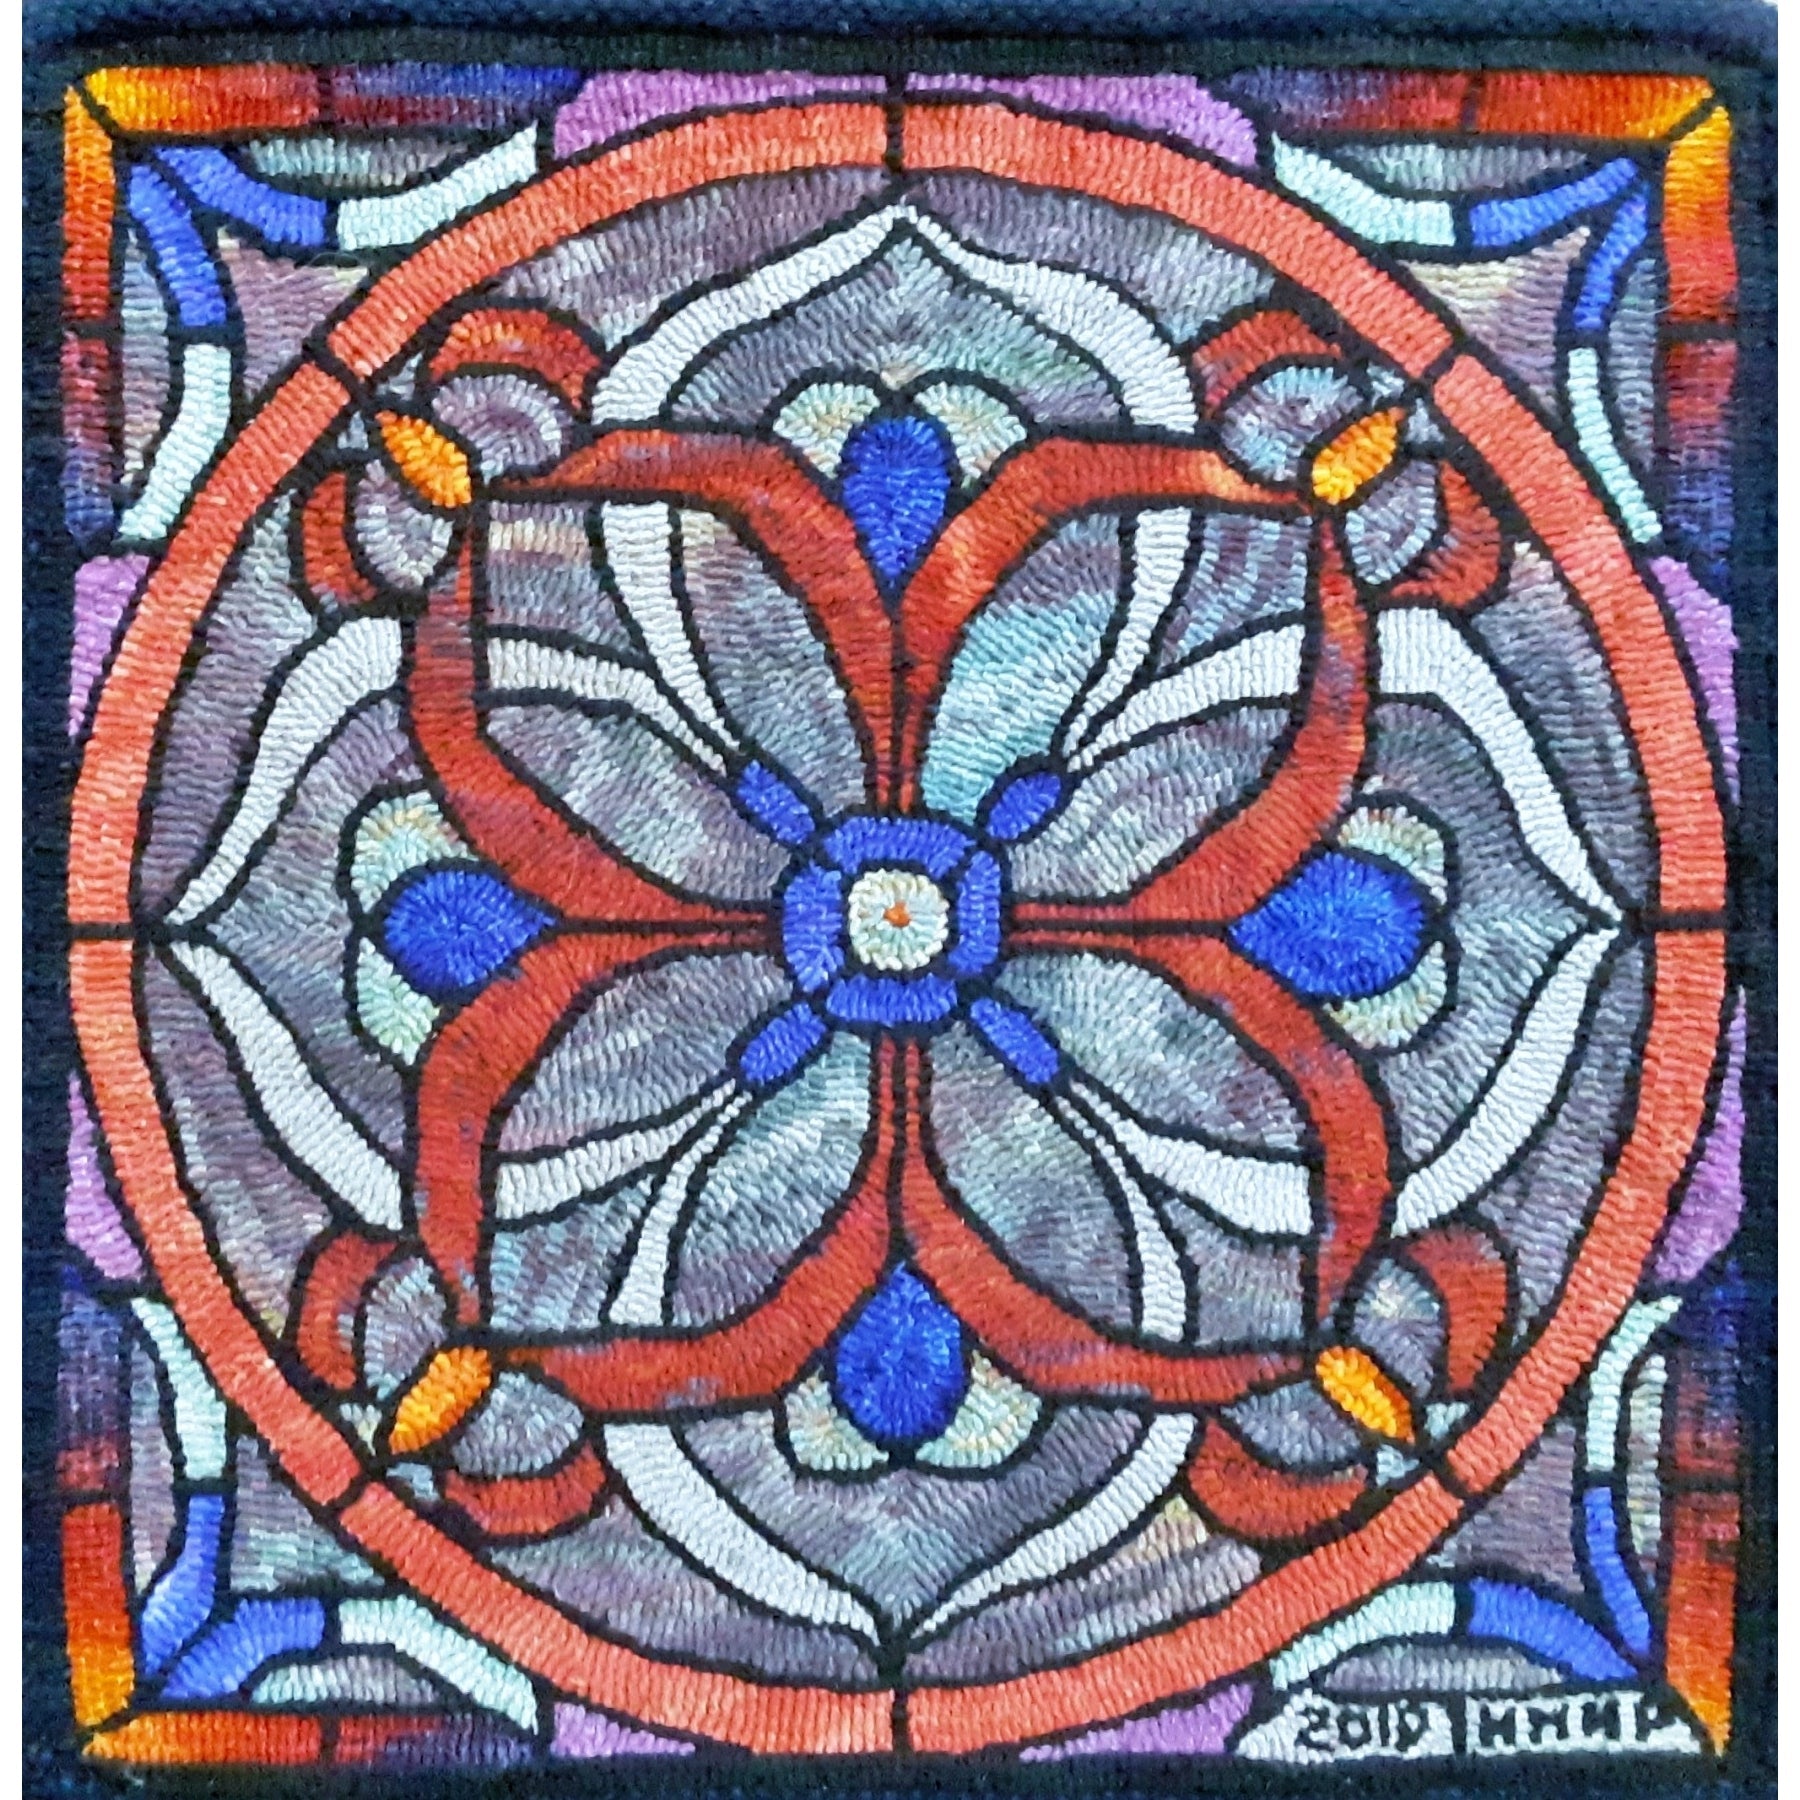 Stained Glass Mosaic, rug hooked by Helen Mar Parkin